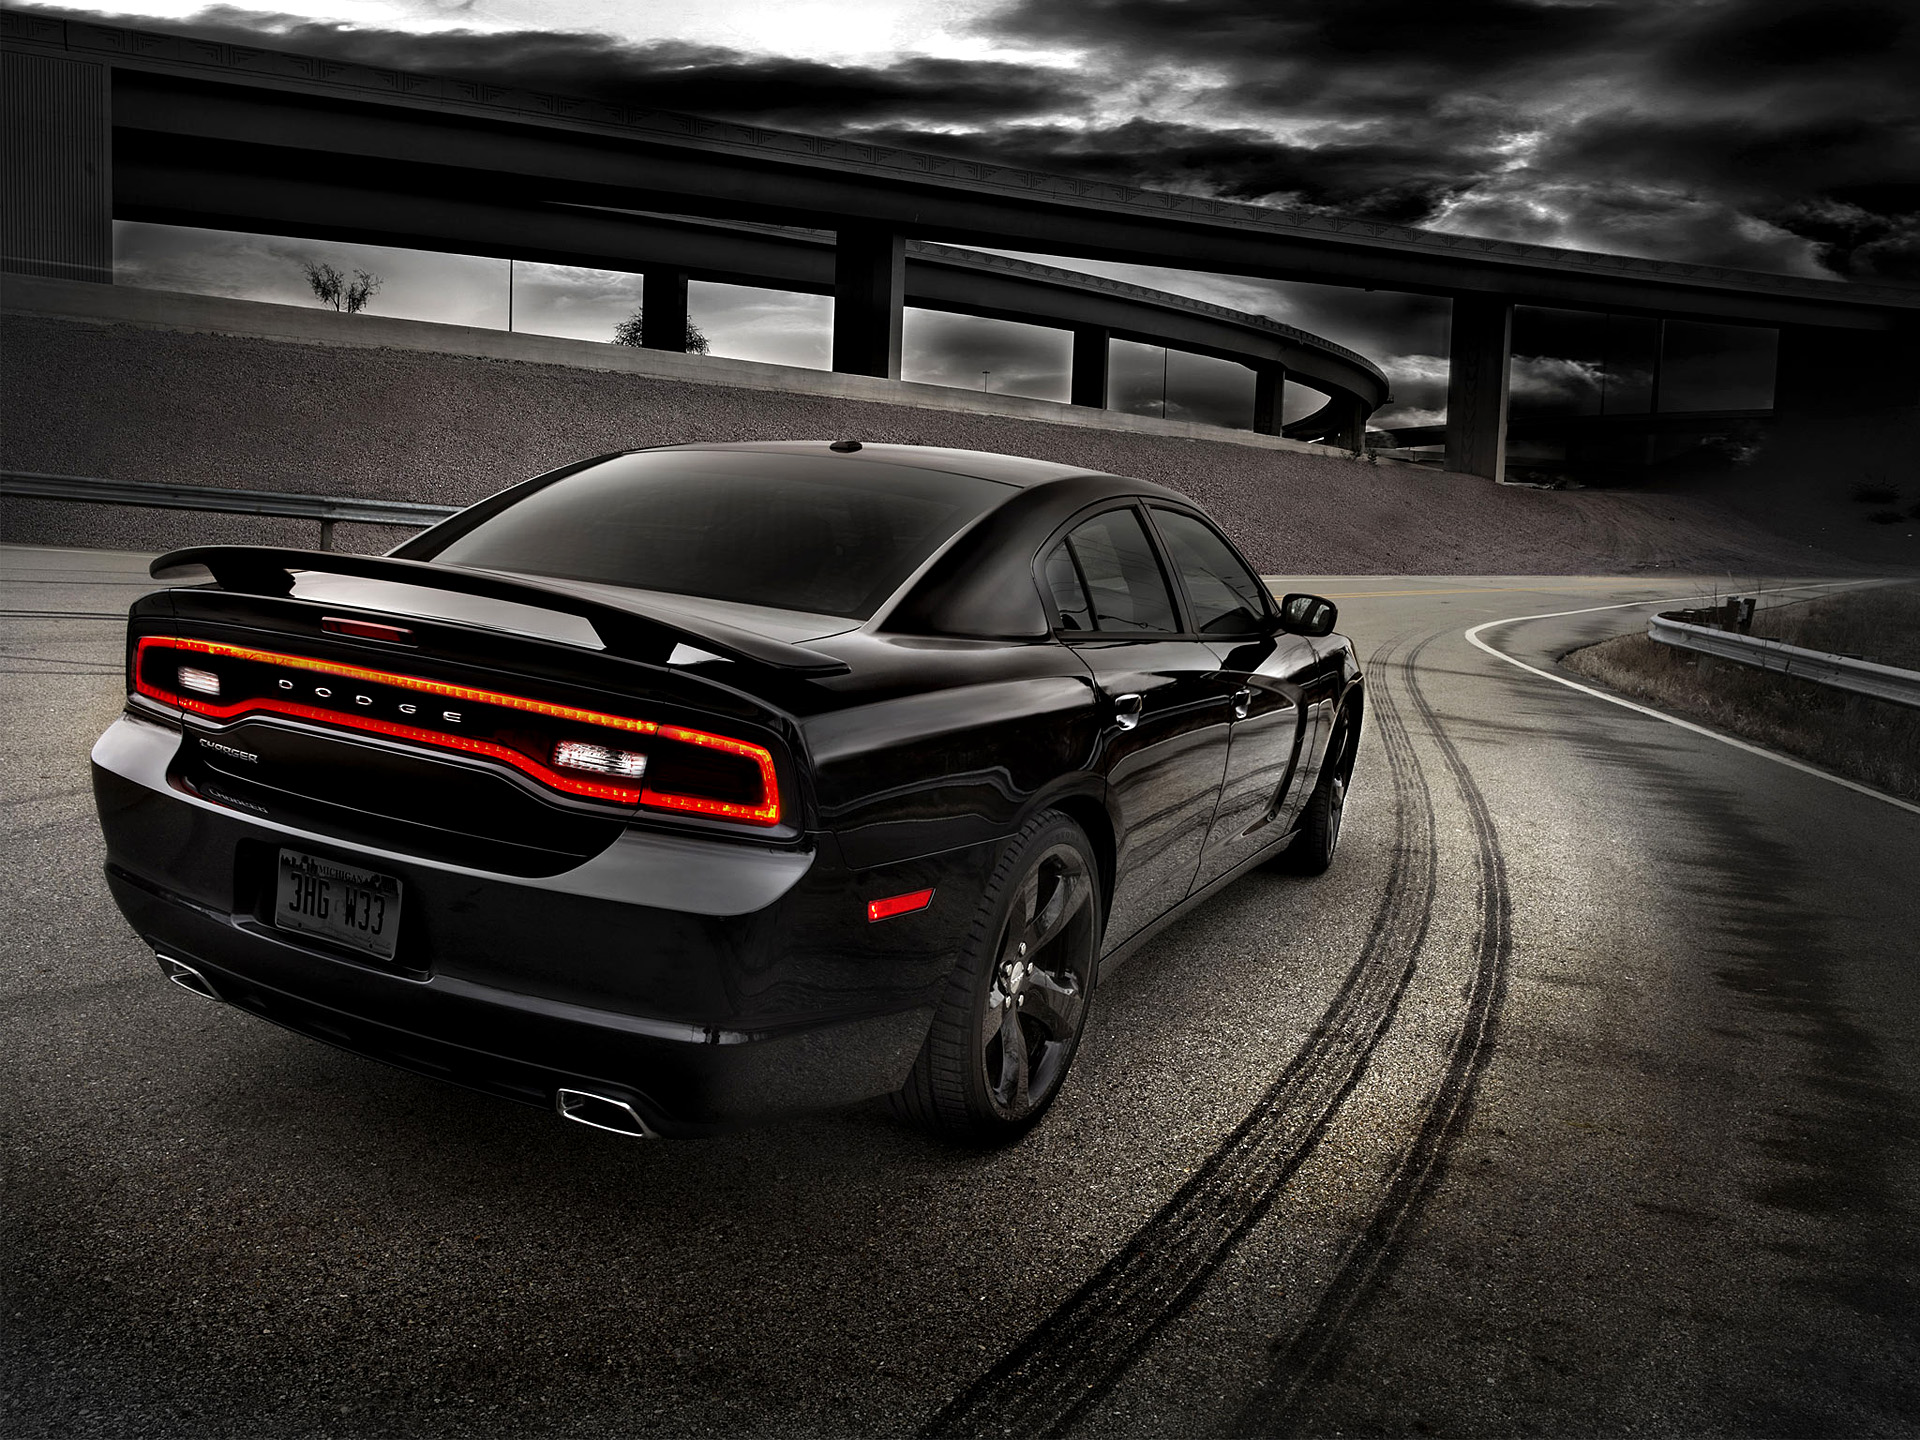 Dodge Charger Blacktop wallpapers for desktop, download free Dodge Charger  Blacktop pictures and backgrounds for PC 